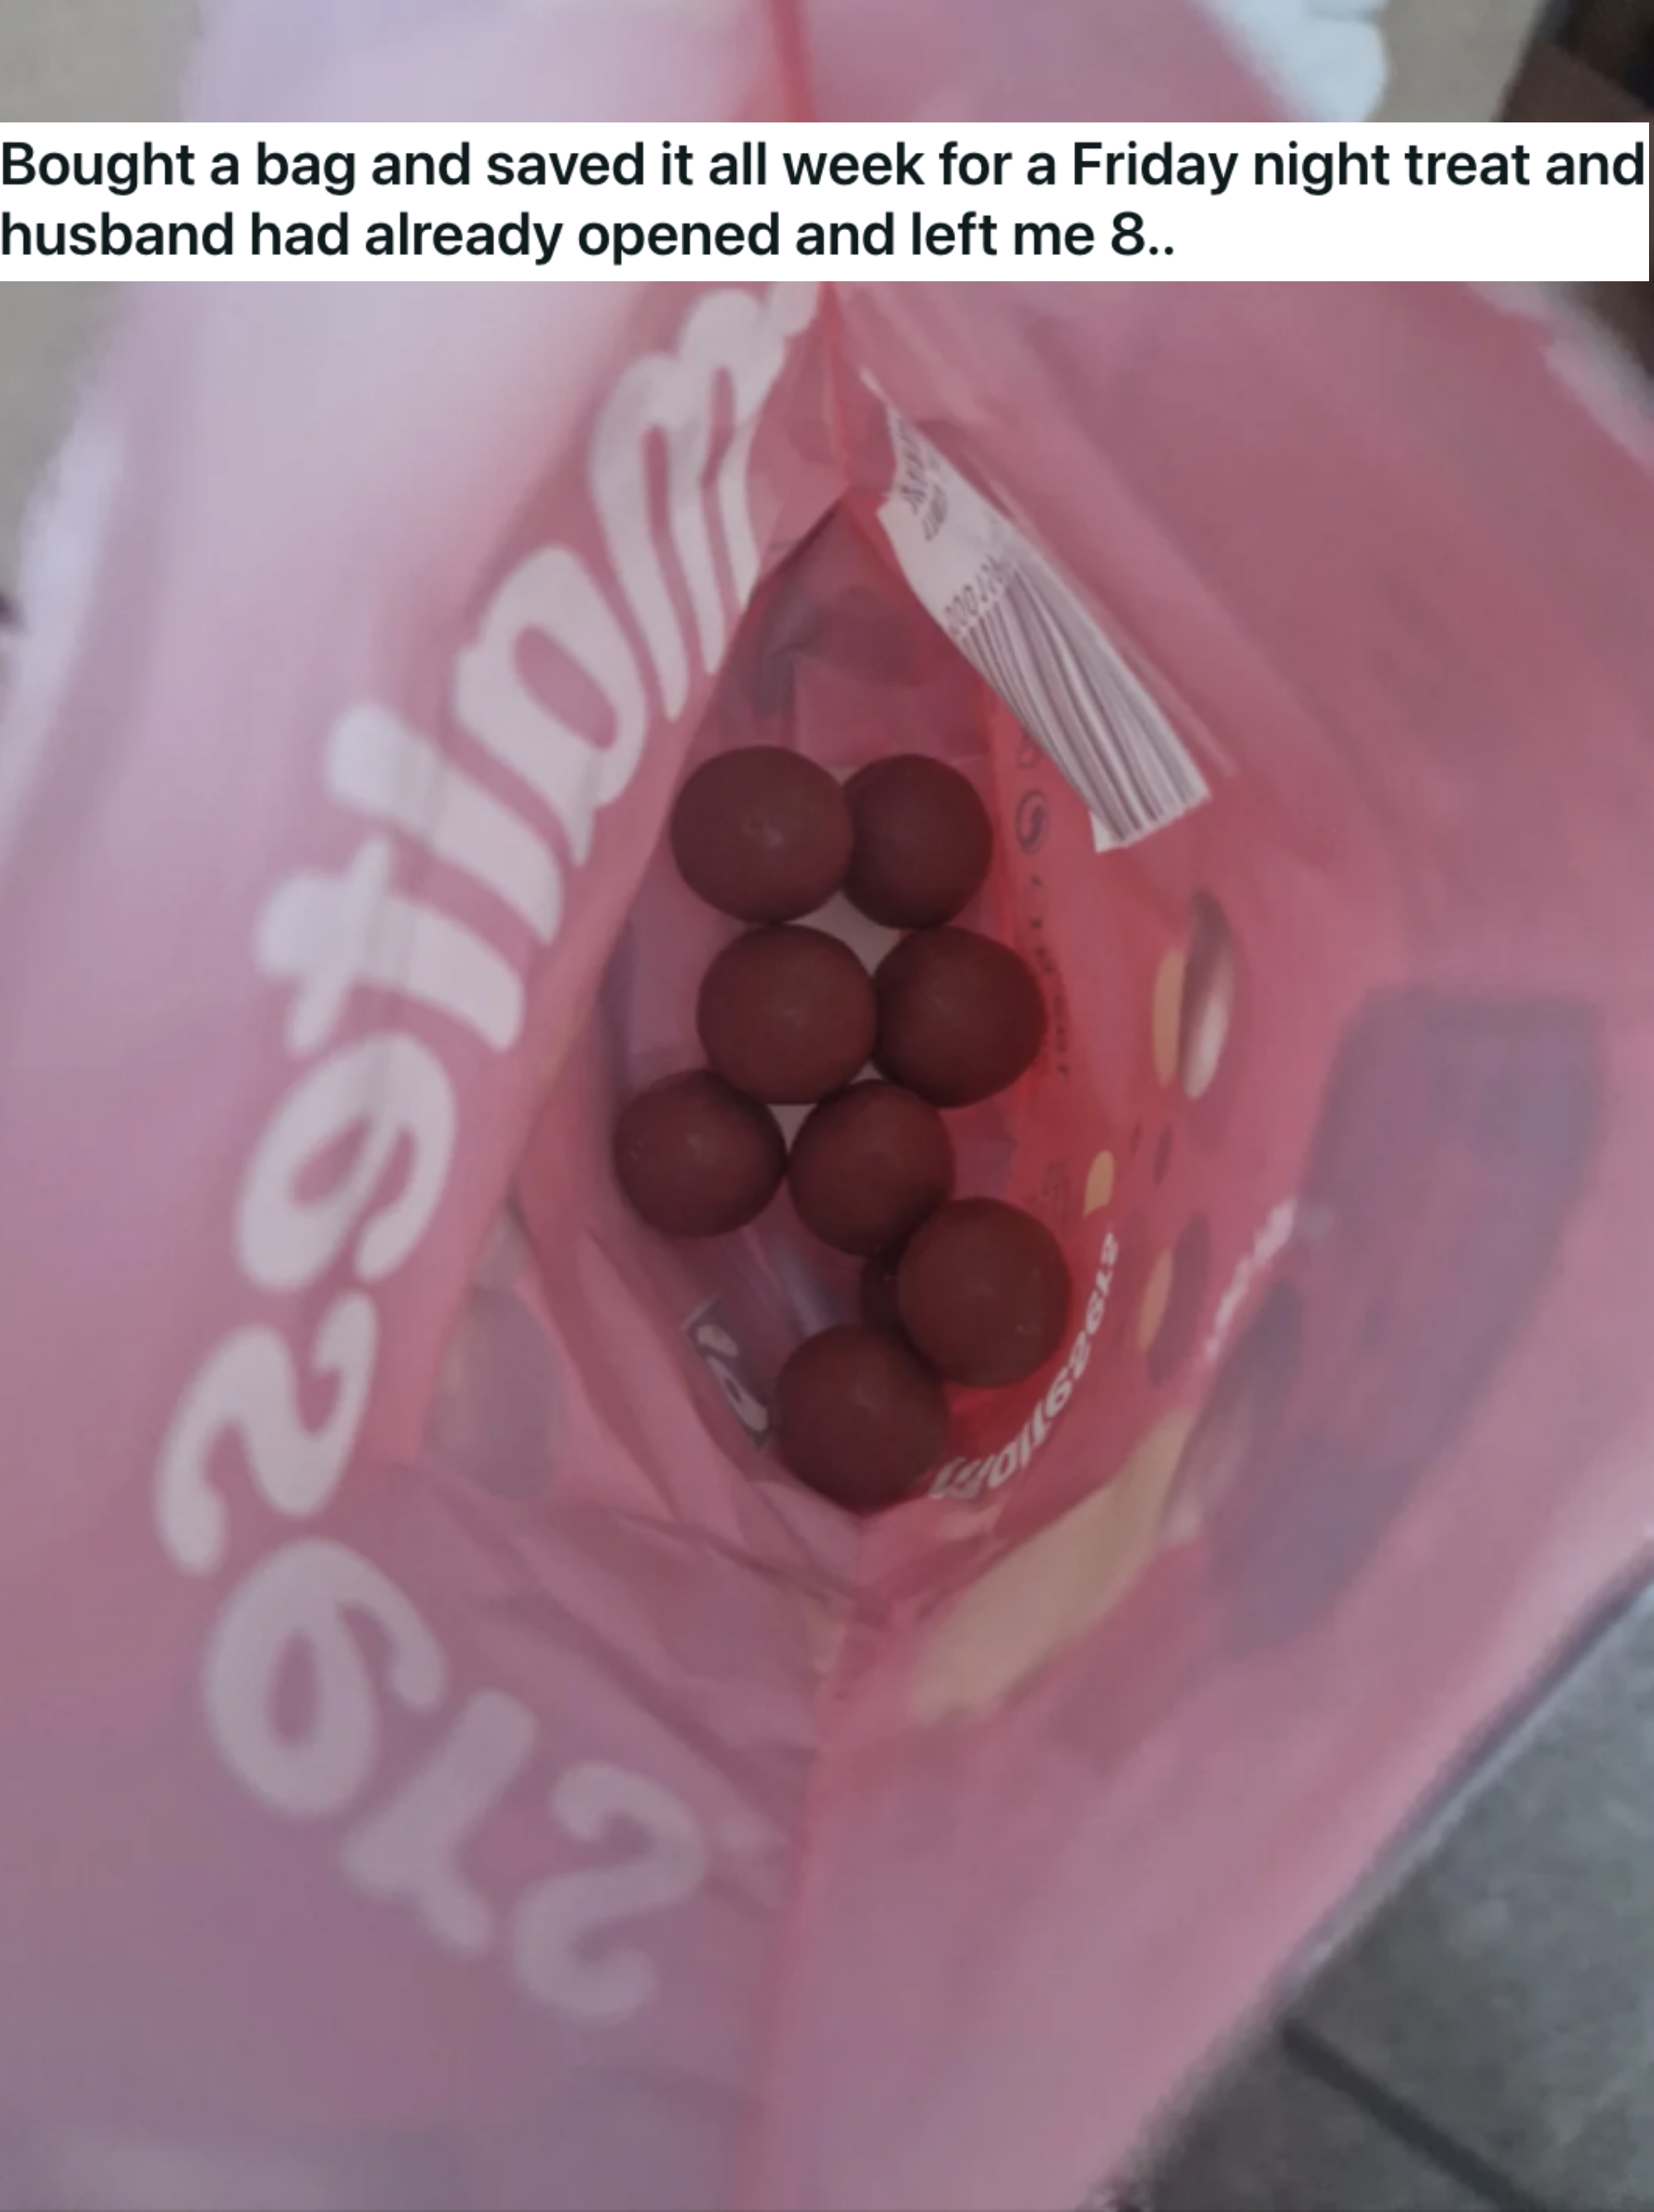 An almost-finished bag of Maltesers